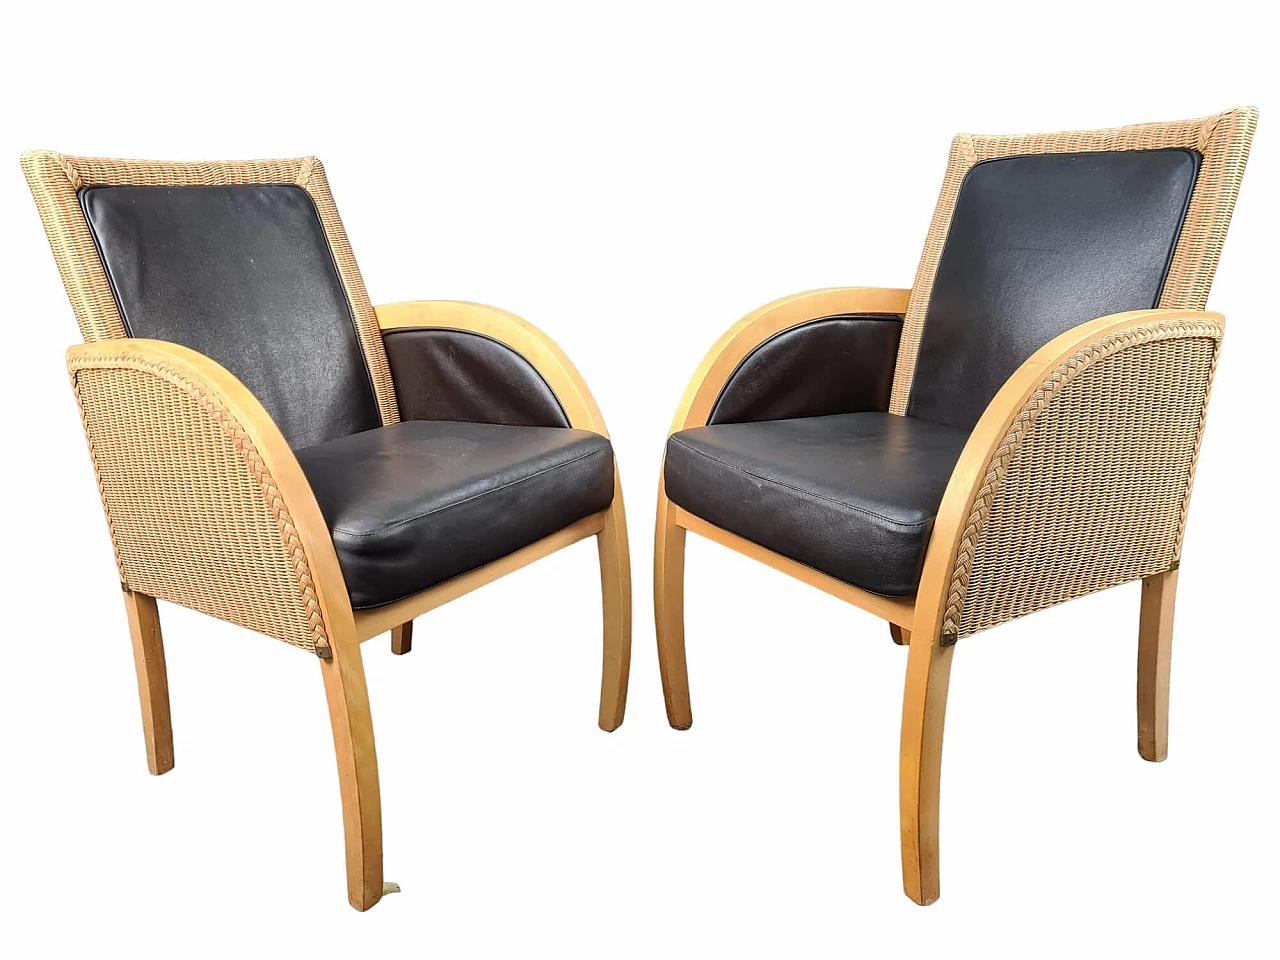 Pair of wood, rattan and leather armchairs by Lloyd Loom 1